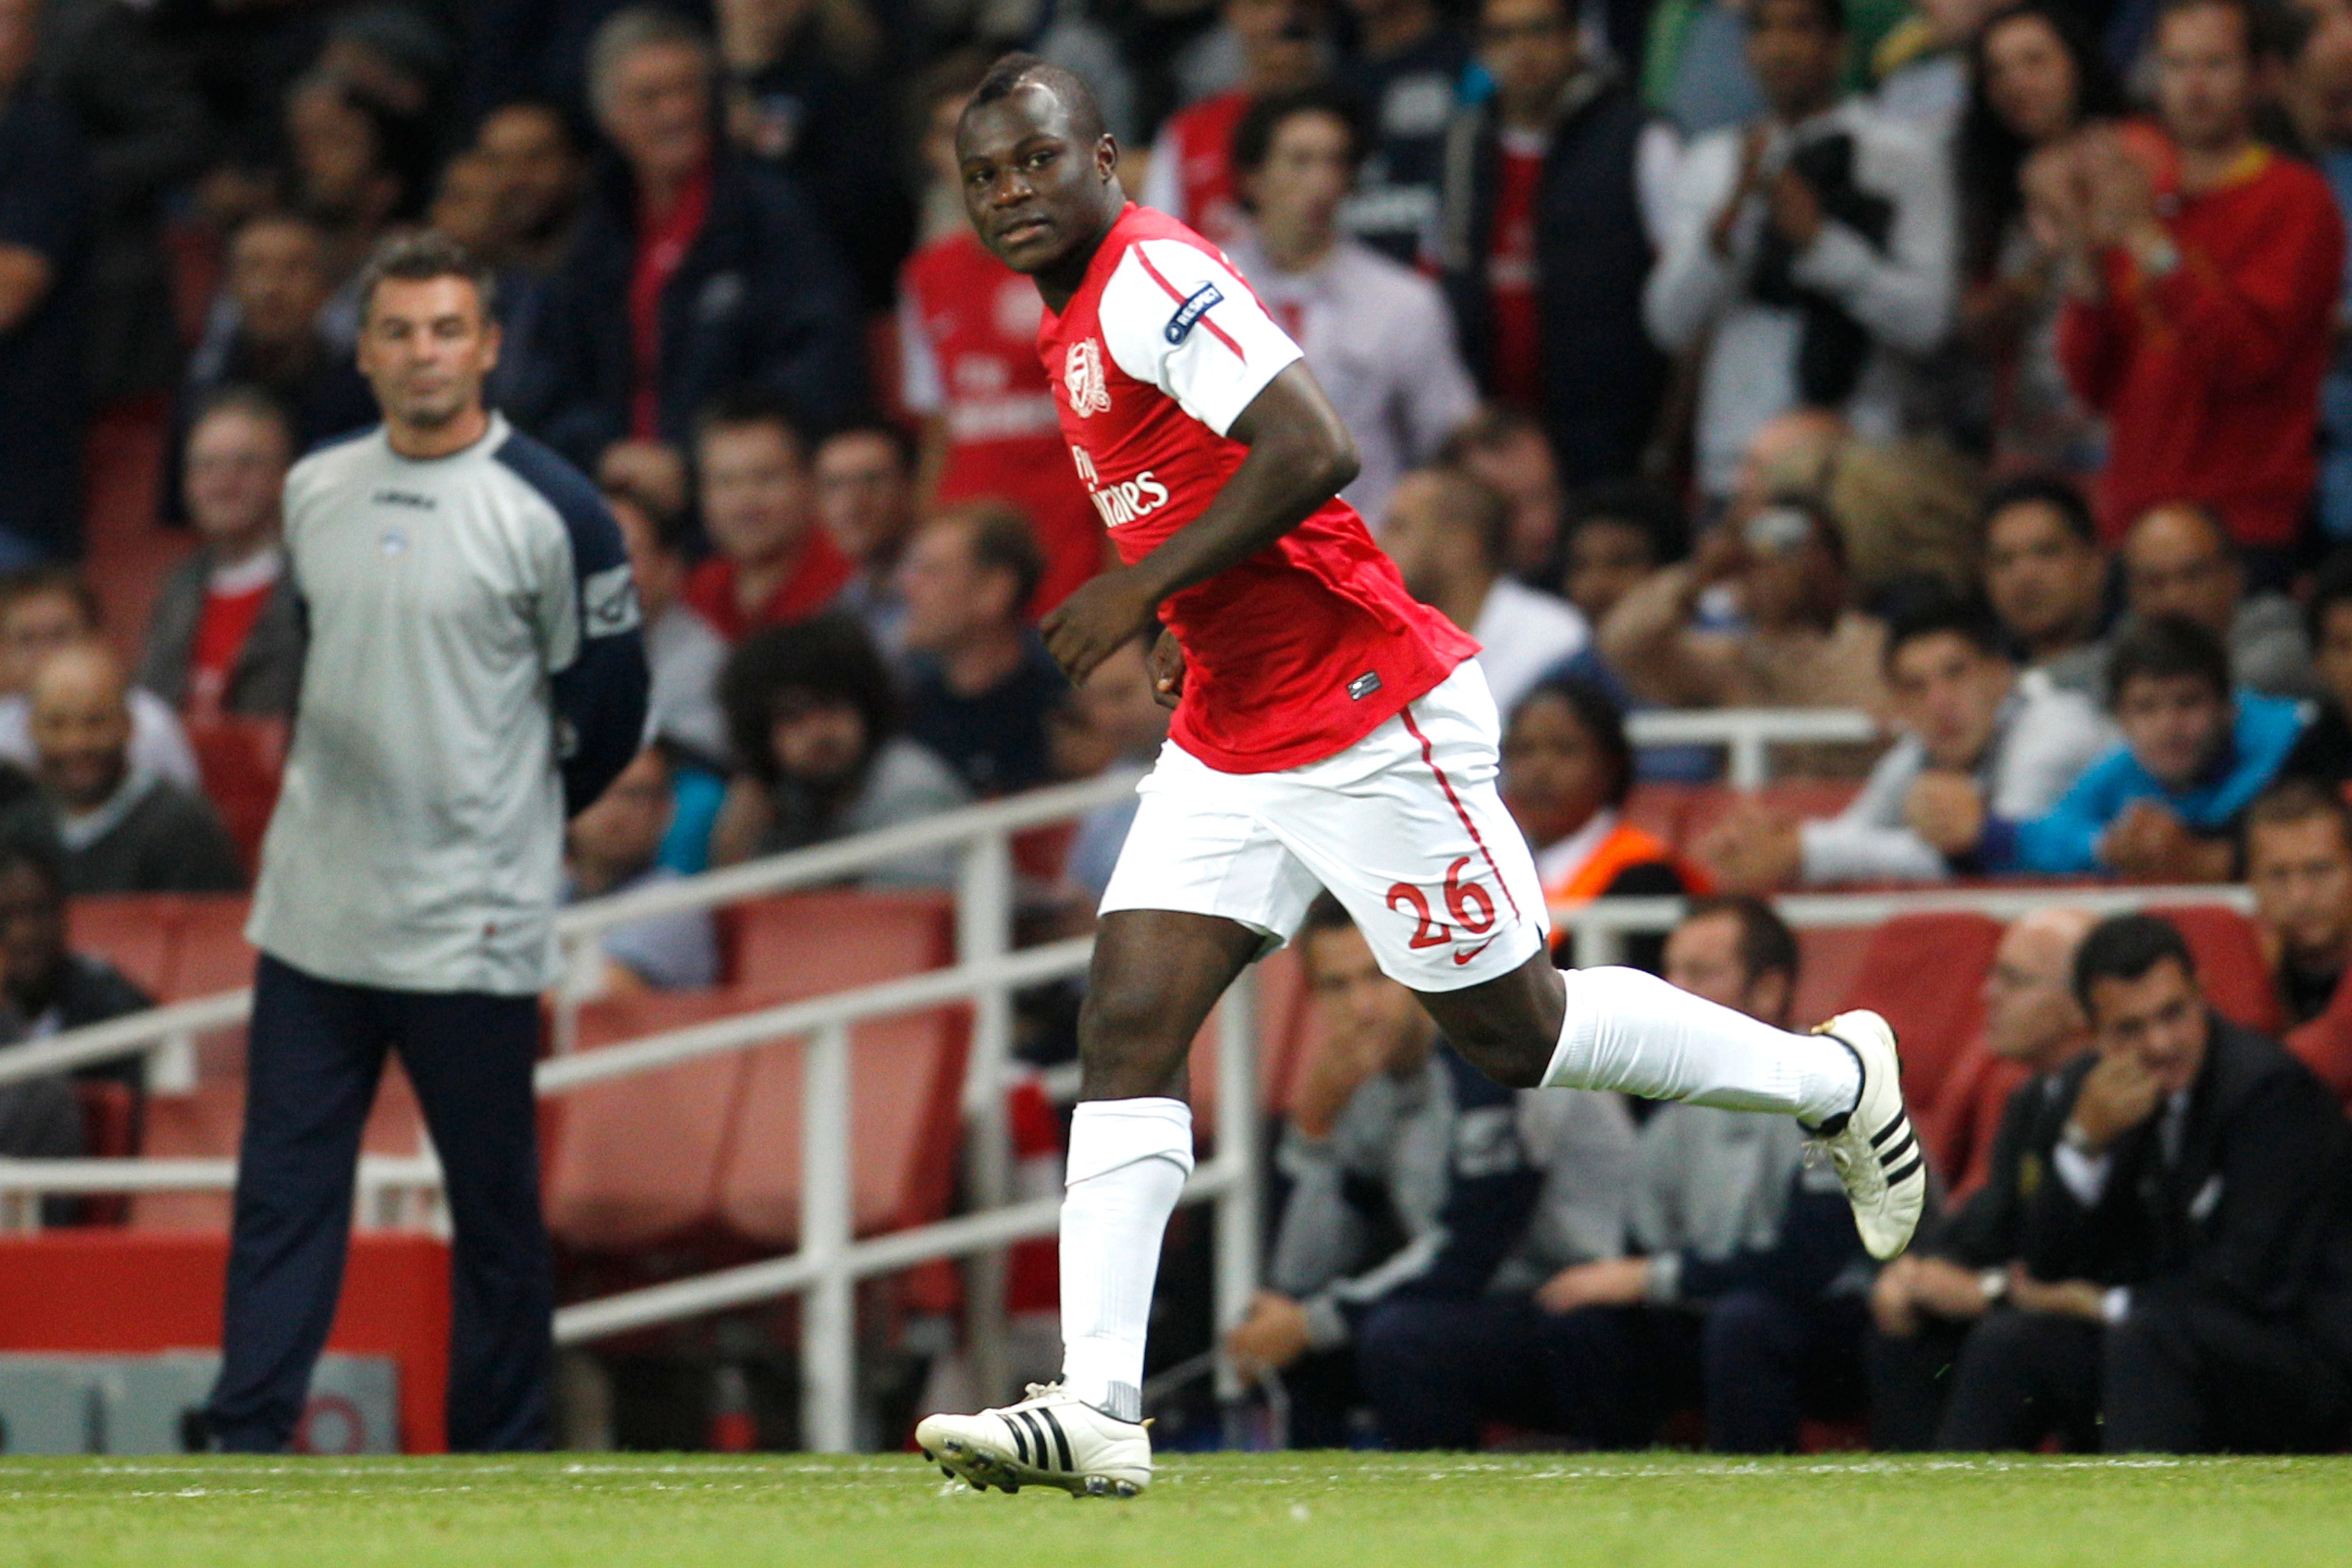 Arsenal youngster Emmanuel Frimpong comes on as a substitute